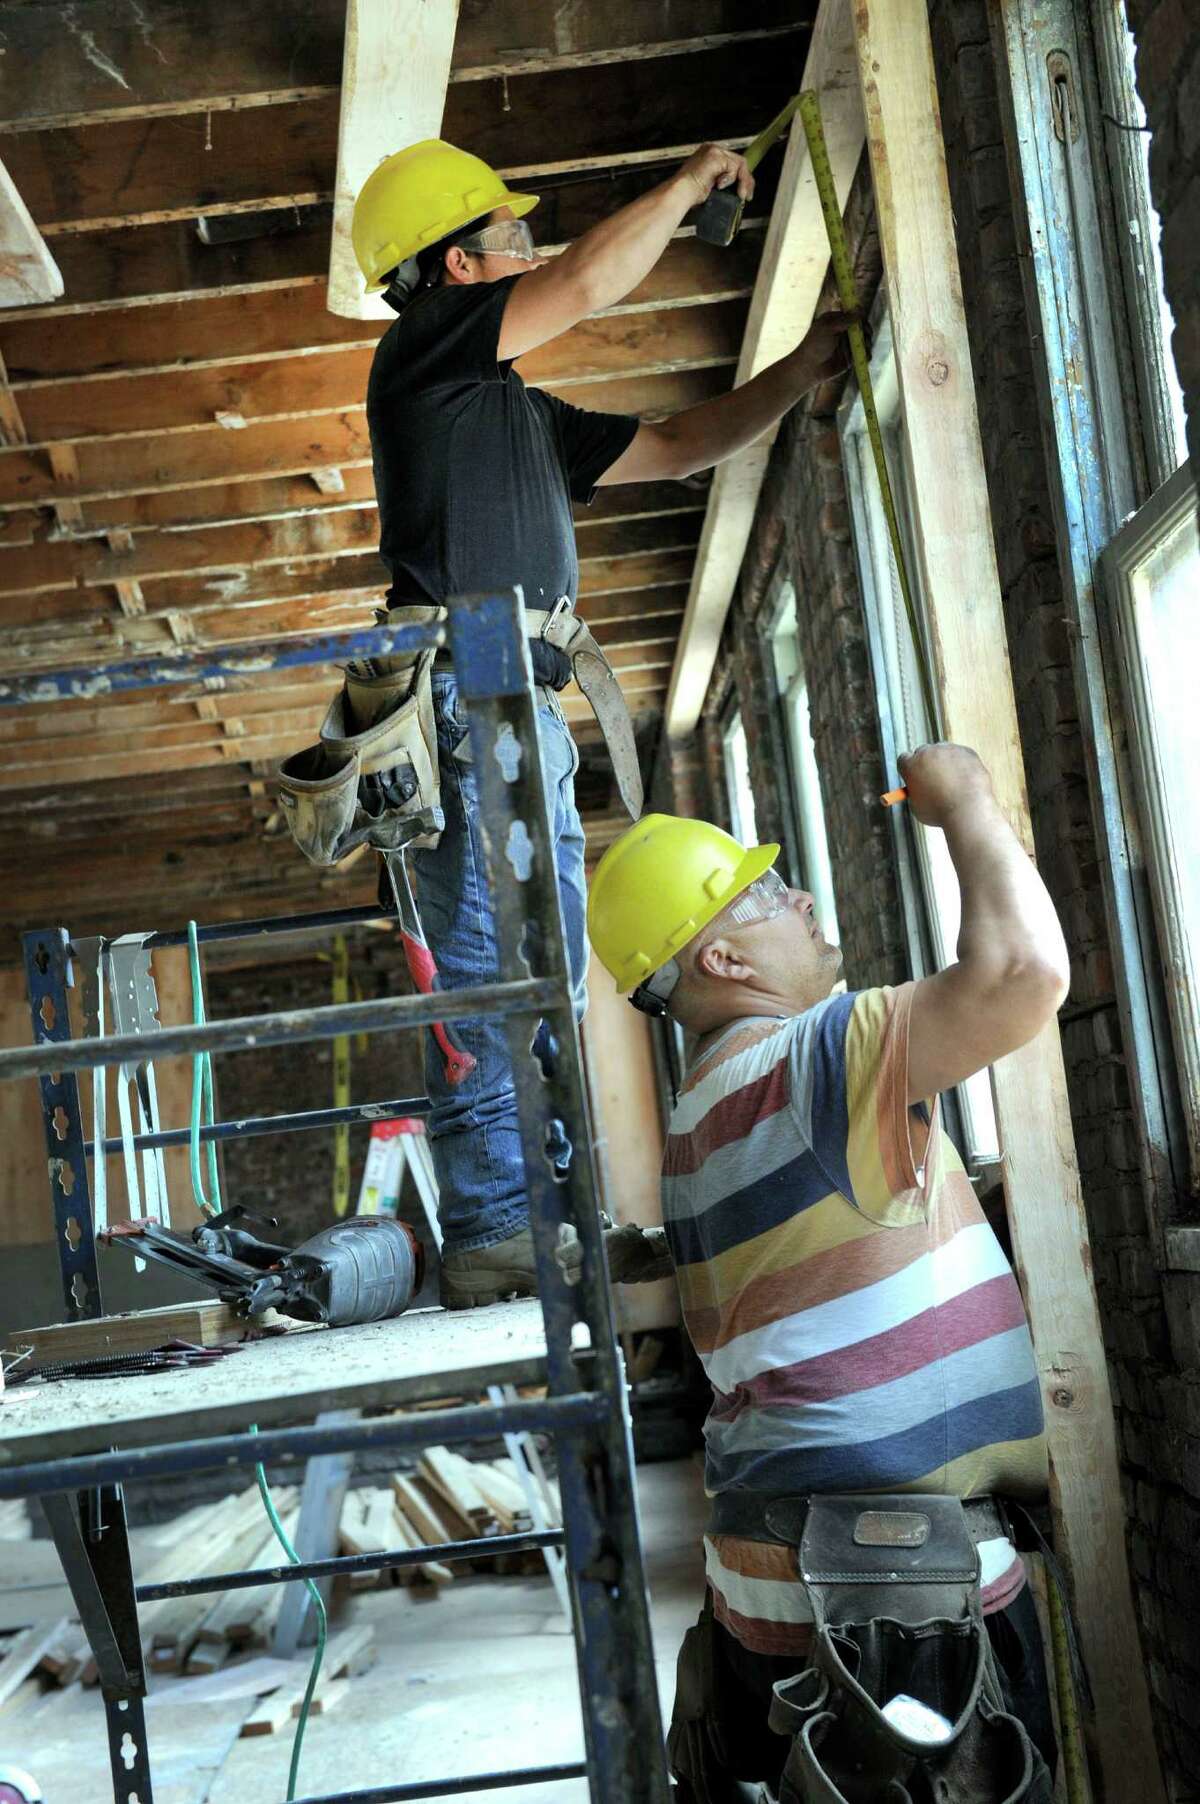 Manuel Guzman, left, and Marcelo Moura work on the inside space of the Pershing Building . The Pershing Building at the corner of Main and West Streets in Danbury is being fitted for Naugatuck Valley Community College’s new downtown campus.